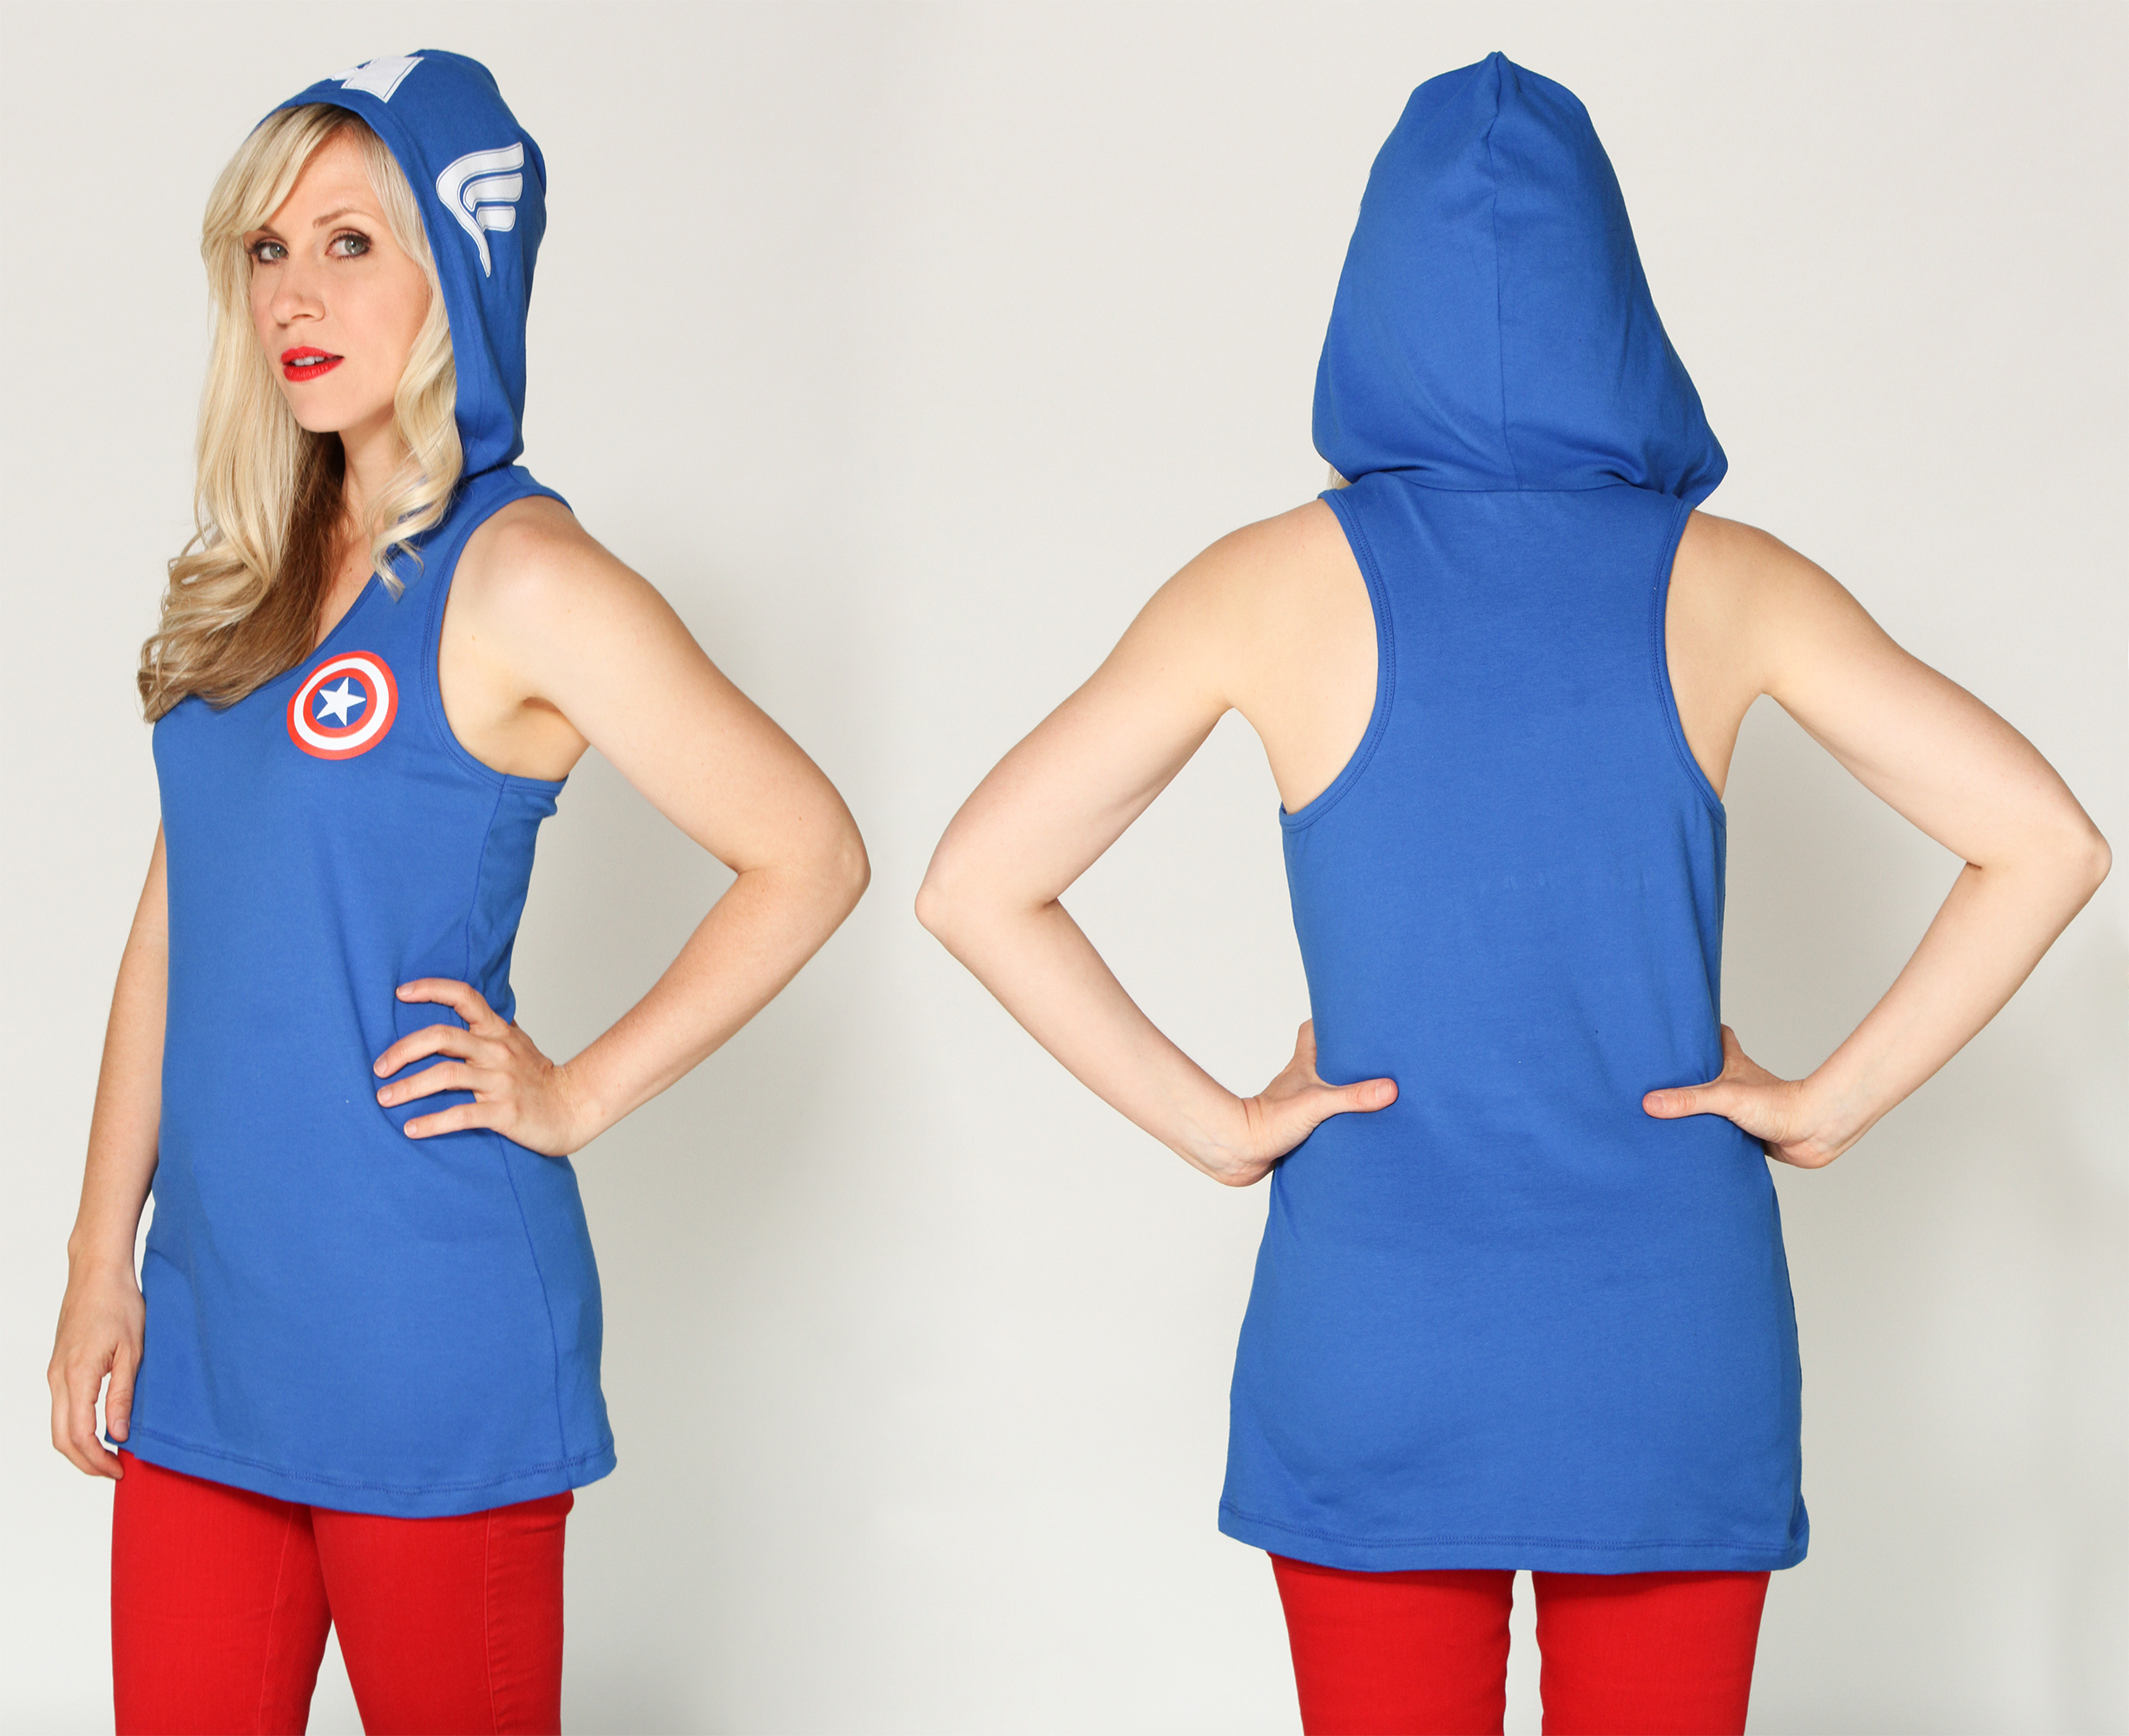 Turns this hooded racerback tank top into an everyday cosplay design! Hood down, casual tank top...hood up instantly feel like the symbol of freedom and patriotism, Captain America!